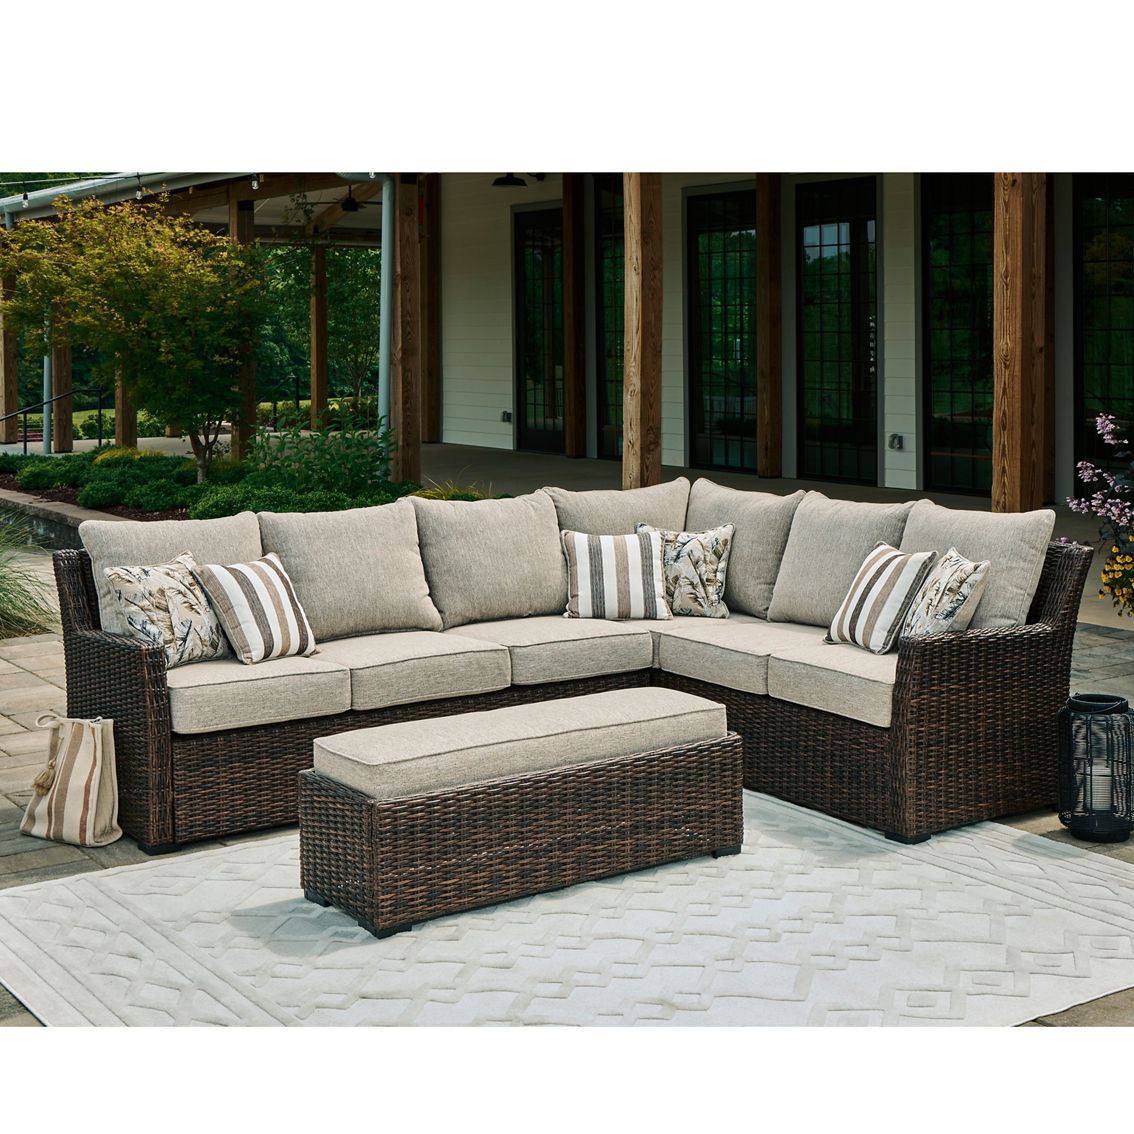 Signature Design by Ashley Brook Ranch 2 pc. Outdoor Sectional Set - Image 2 of 3